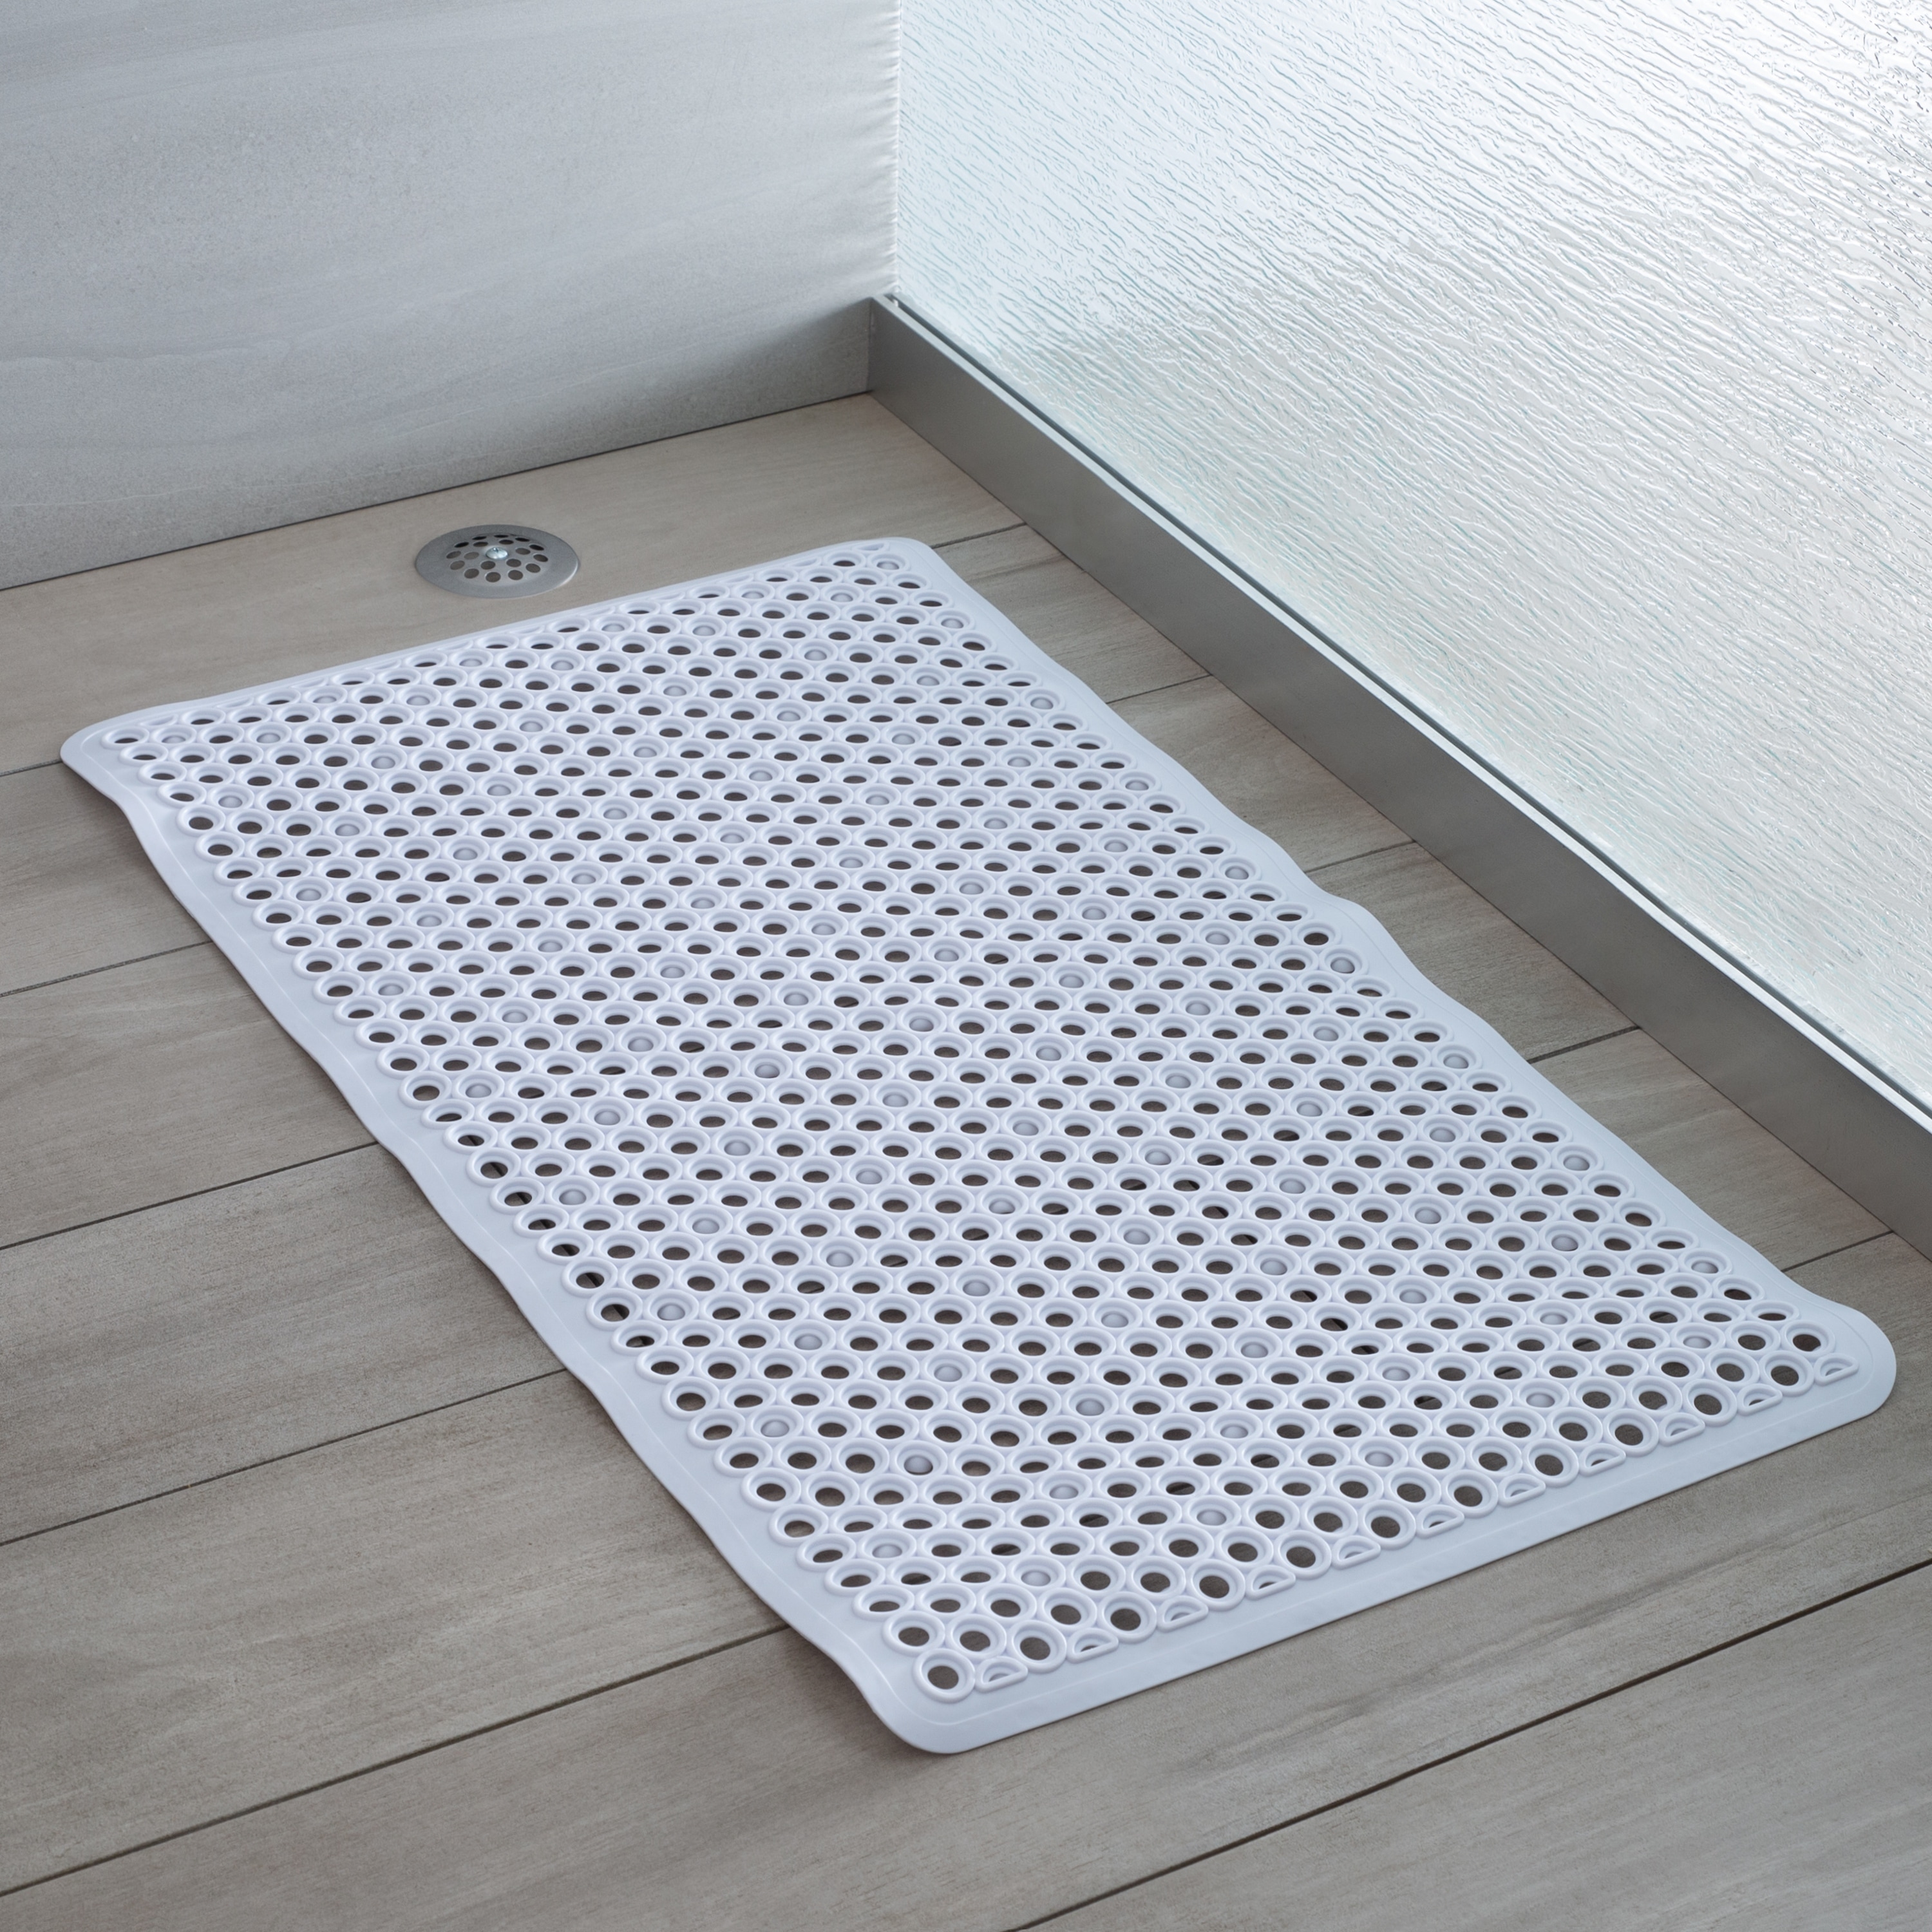 https://ak1.ostkcdn.com/images/products/is/images/direct/e38c5cb911e5928b6a3d126aae3b99349a3aeac5/Bath-Bliss-Self-Draining-Bath-Mat.jpg